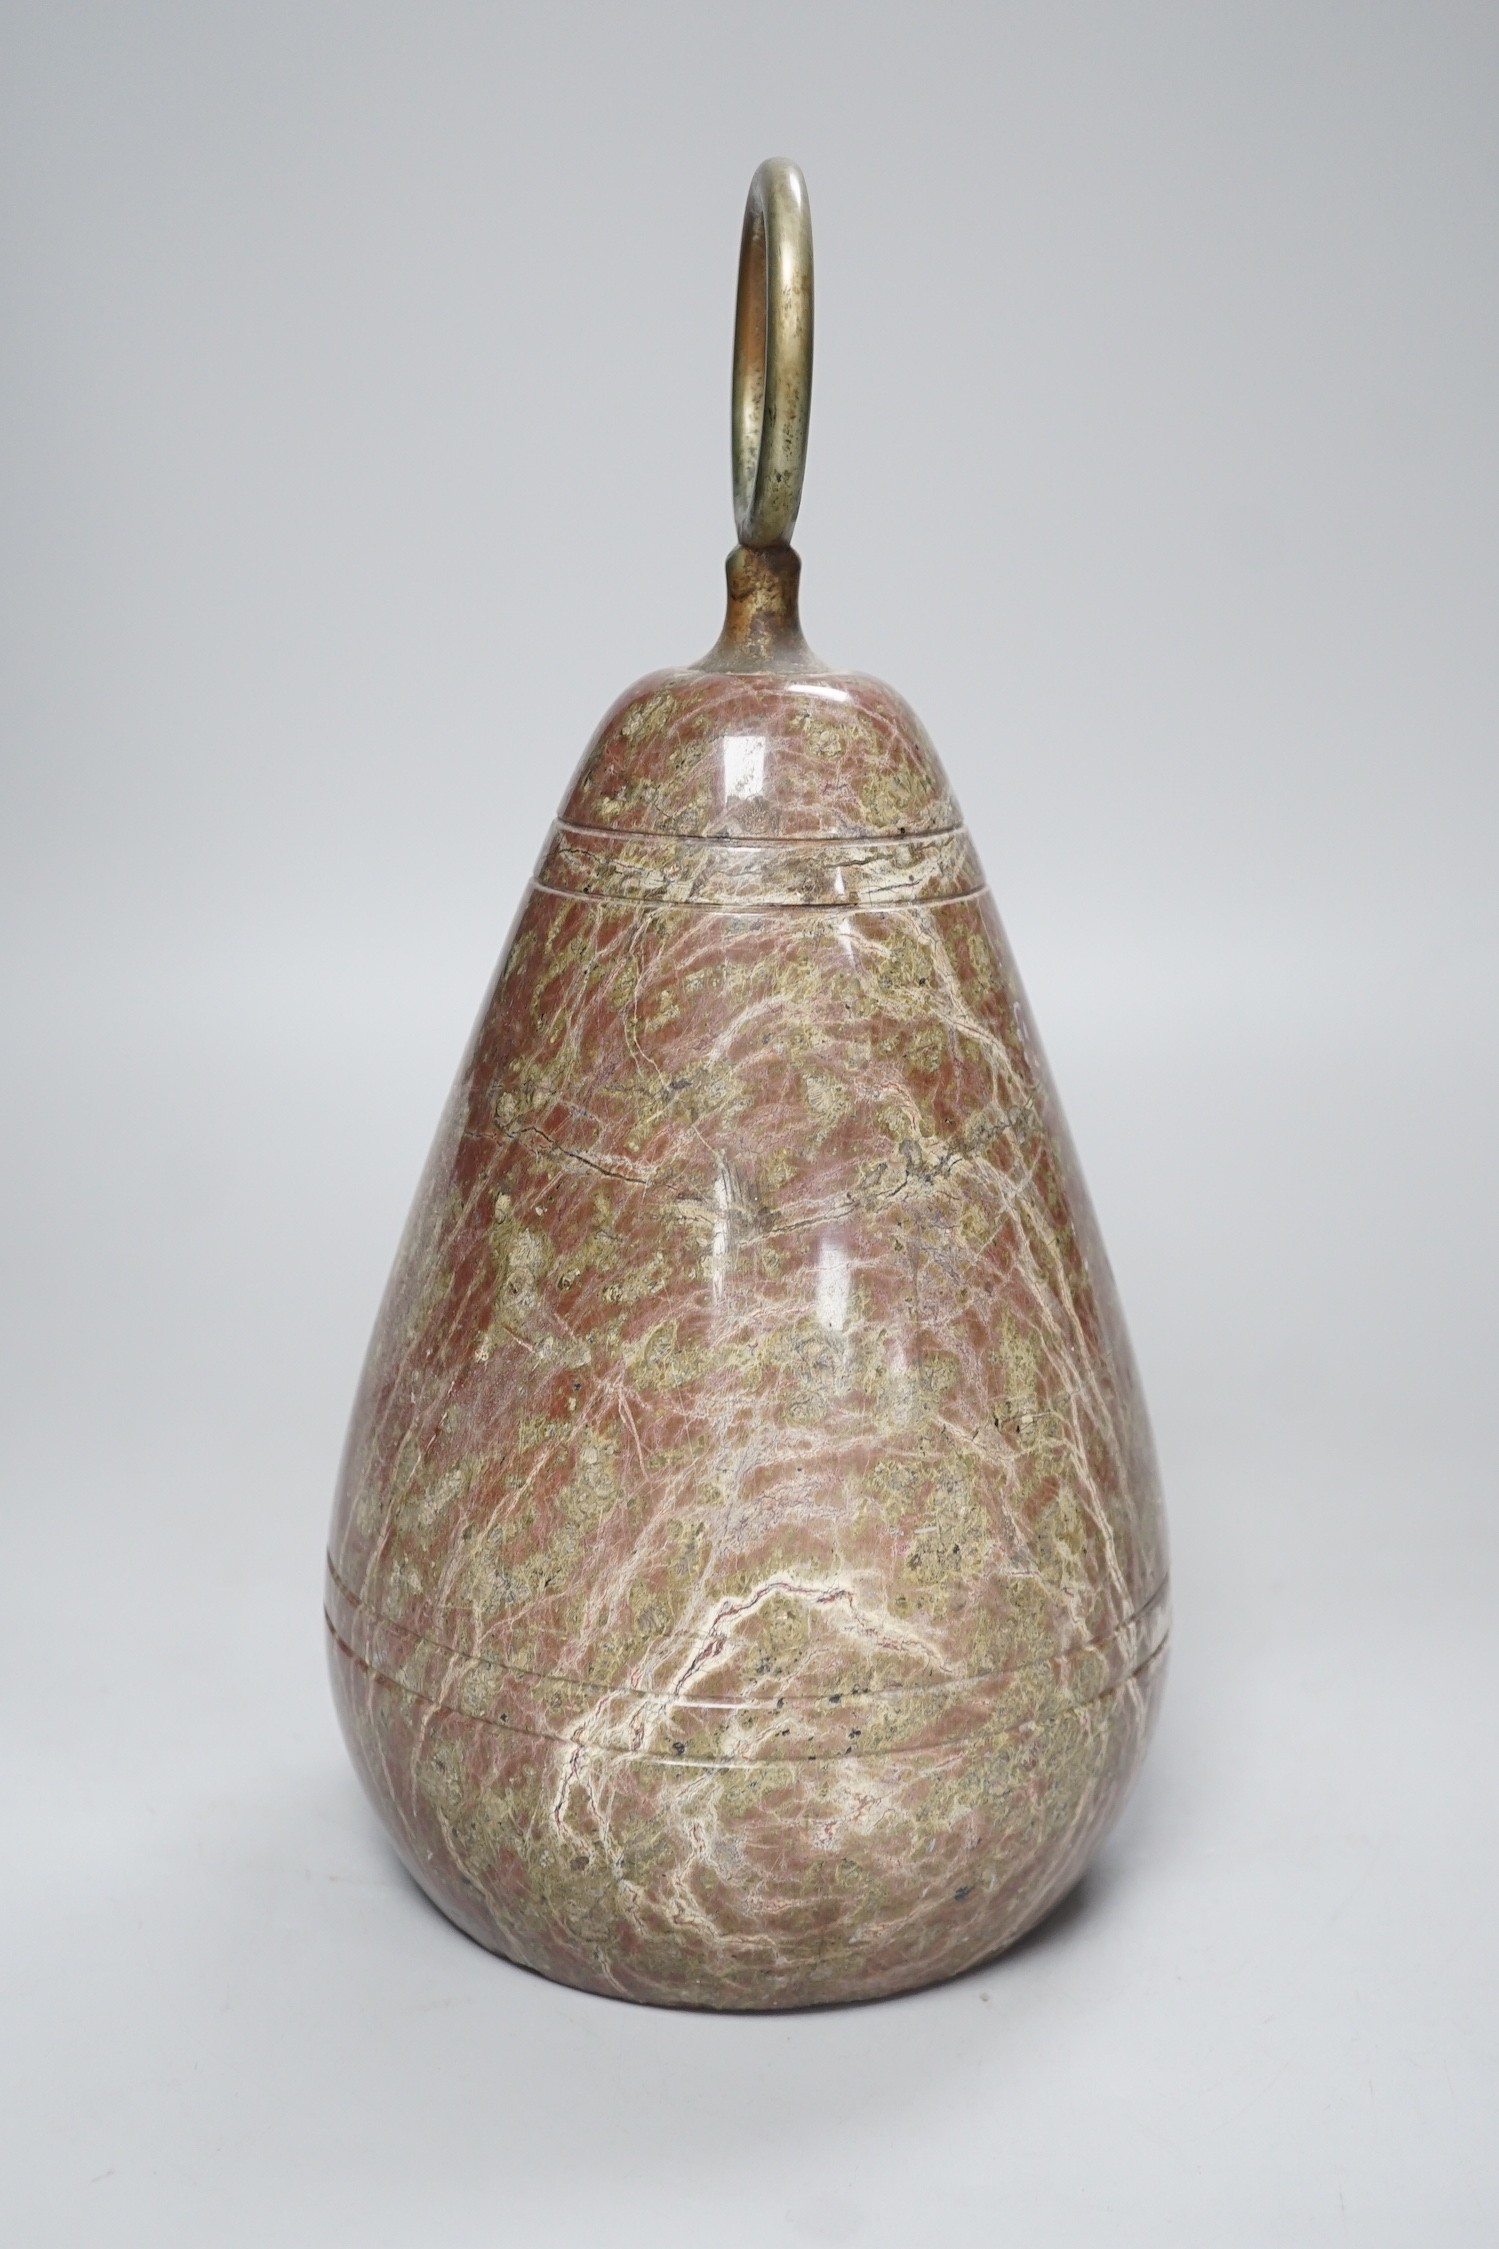 A polished serpentine doorstop. 21cm tall